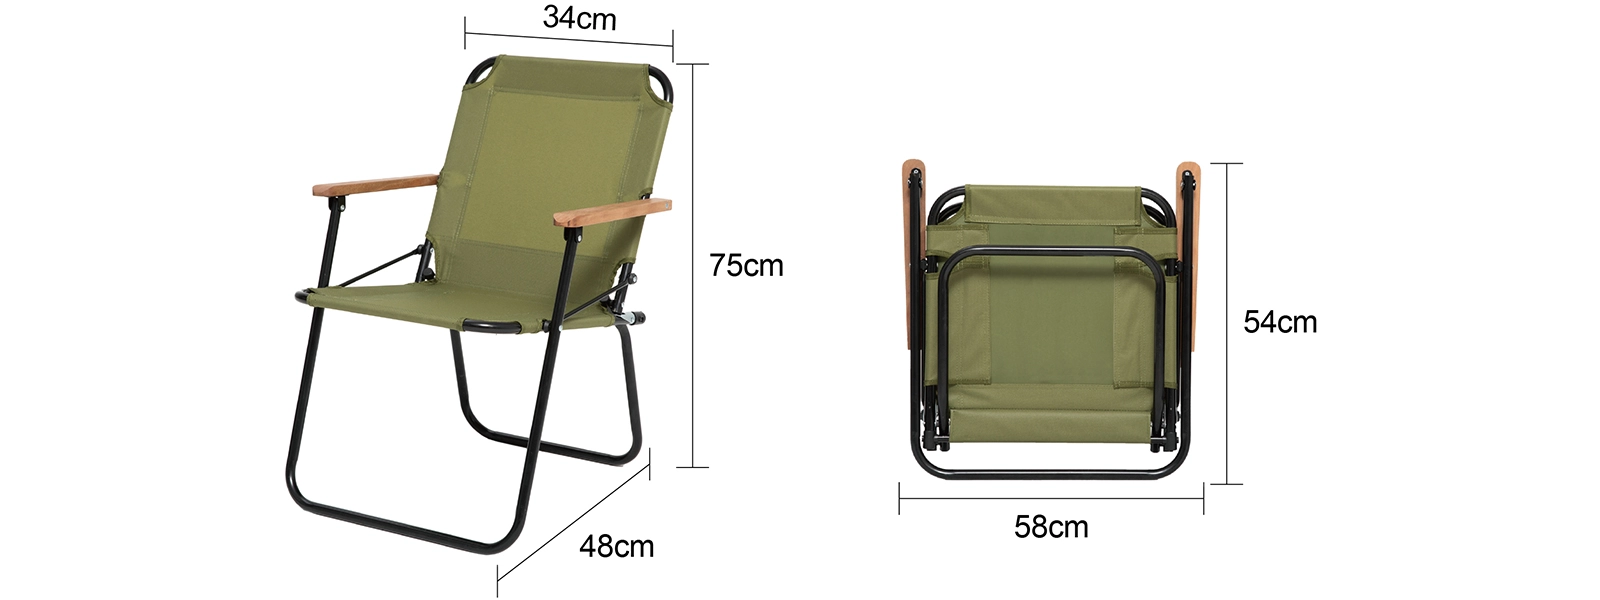 details of Lightweight Camping folding Chair/Beach Chair in Kermit Style with Wood Armrest